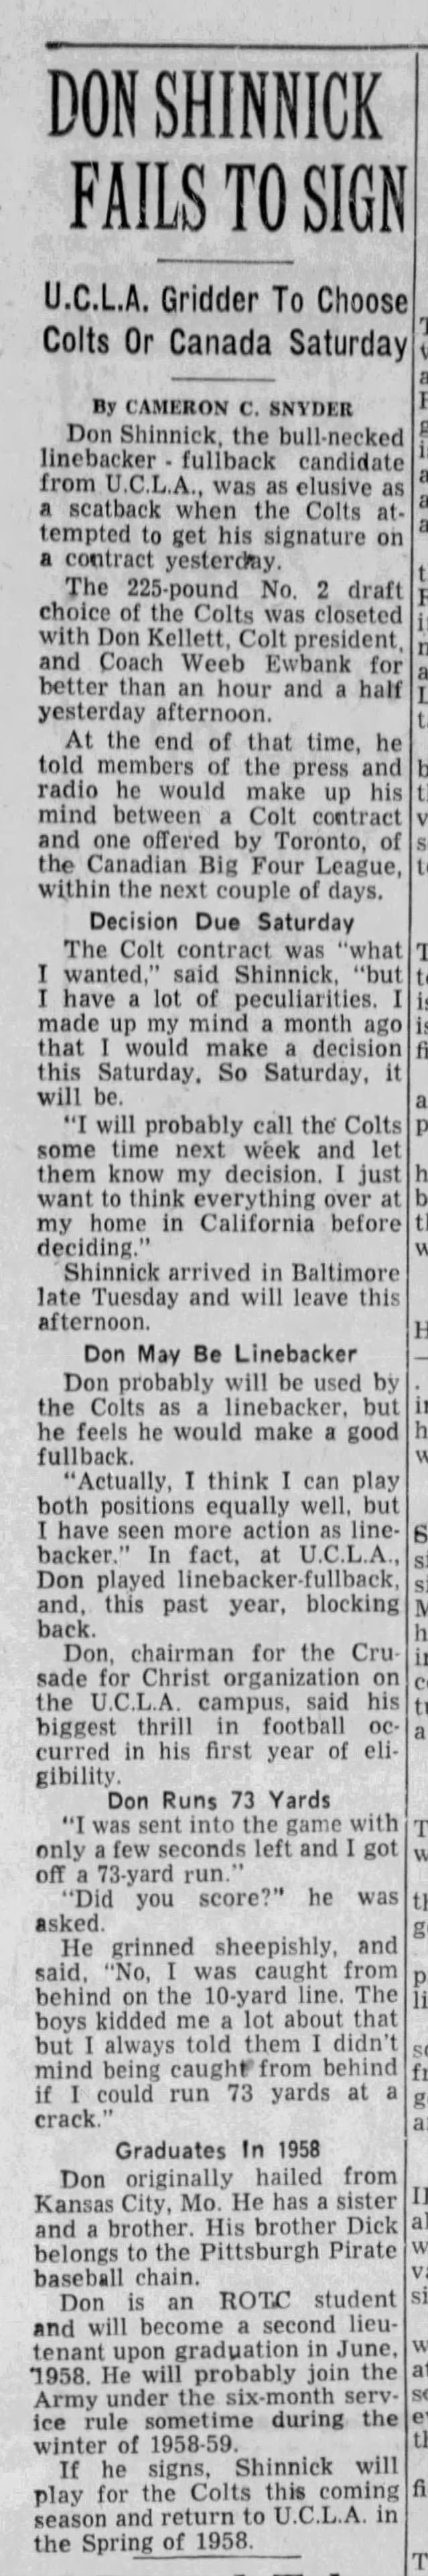 Don Shinnick Fails to Sign First Contract With Baltimore Colts, Final Decision to Come on Saturday